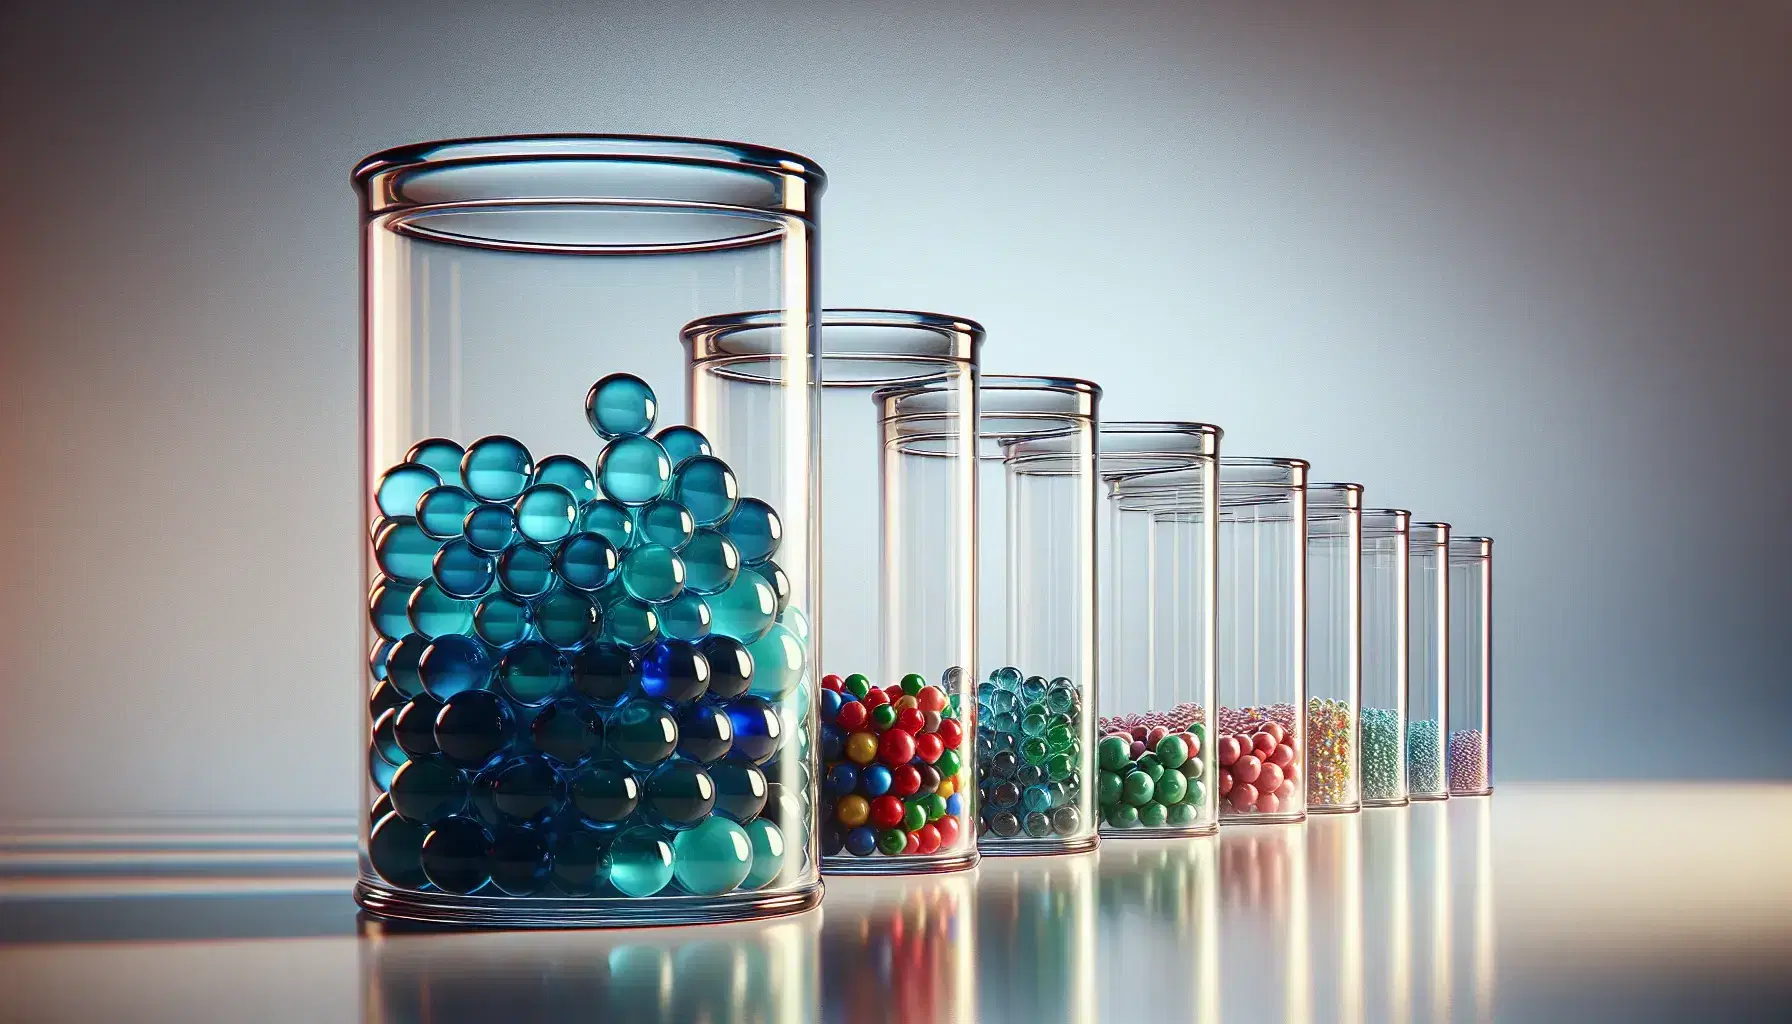 Series of glass jars on a reflective surface with colored marbles: full blue, 3/4 red, half green, 1/4 yellow, a few purple.